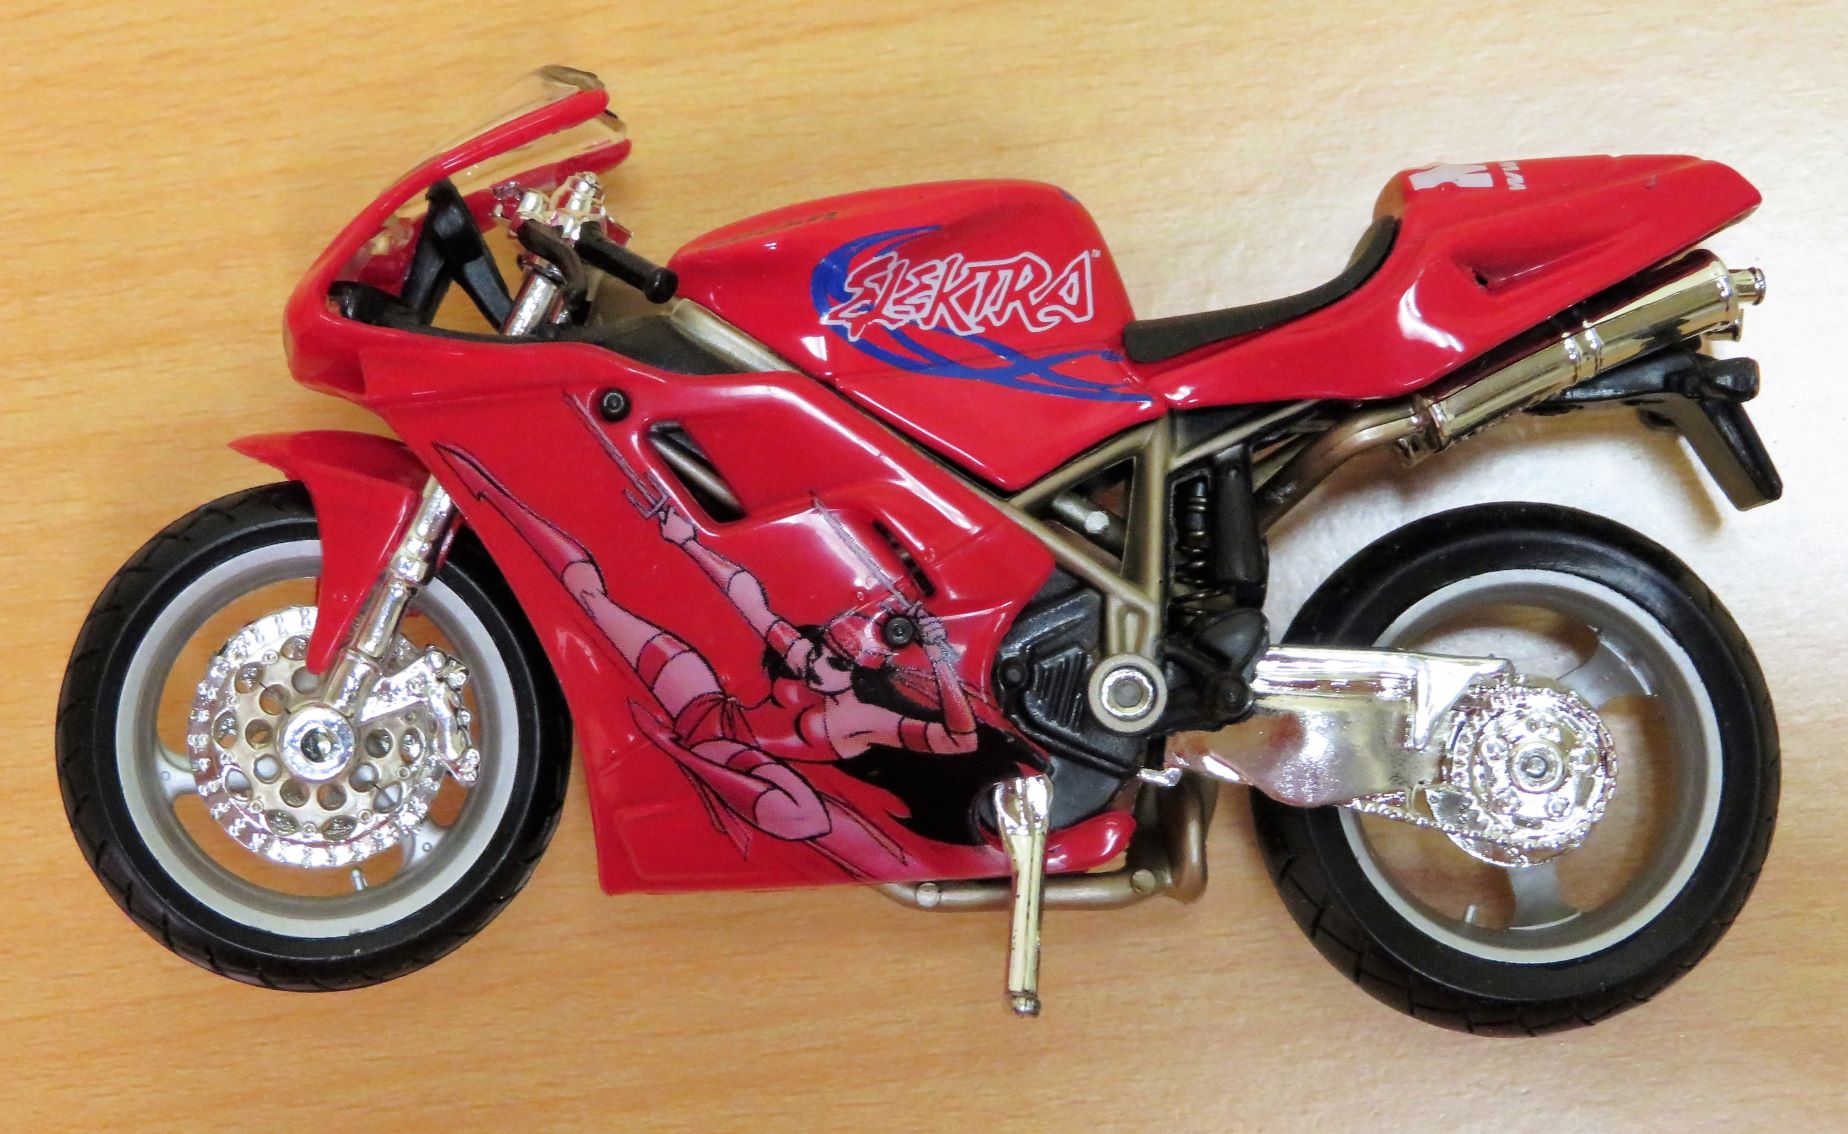 Maisto - Ultimate Marvel Motorcycle Collection - Elektra Ducati 748 [Brian  Carnell's Wiki]